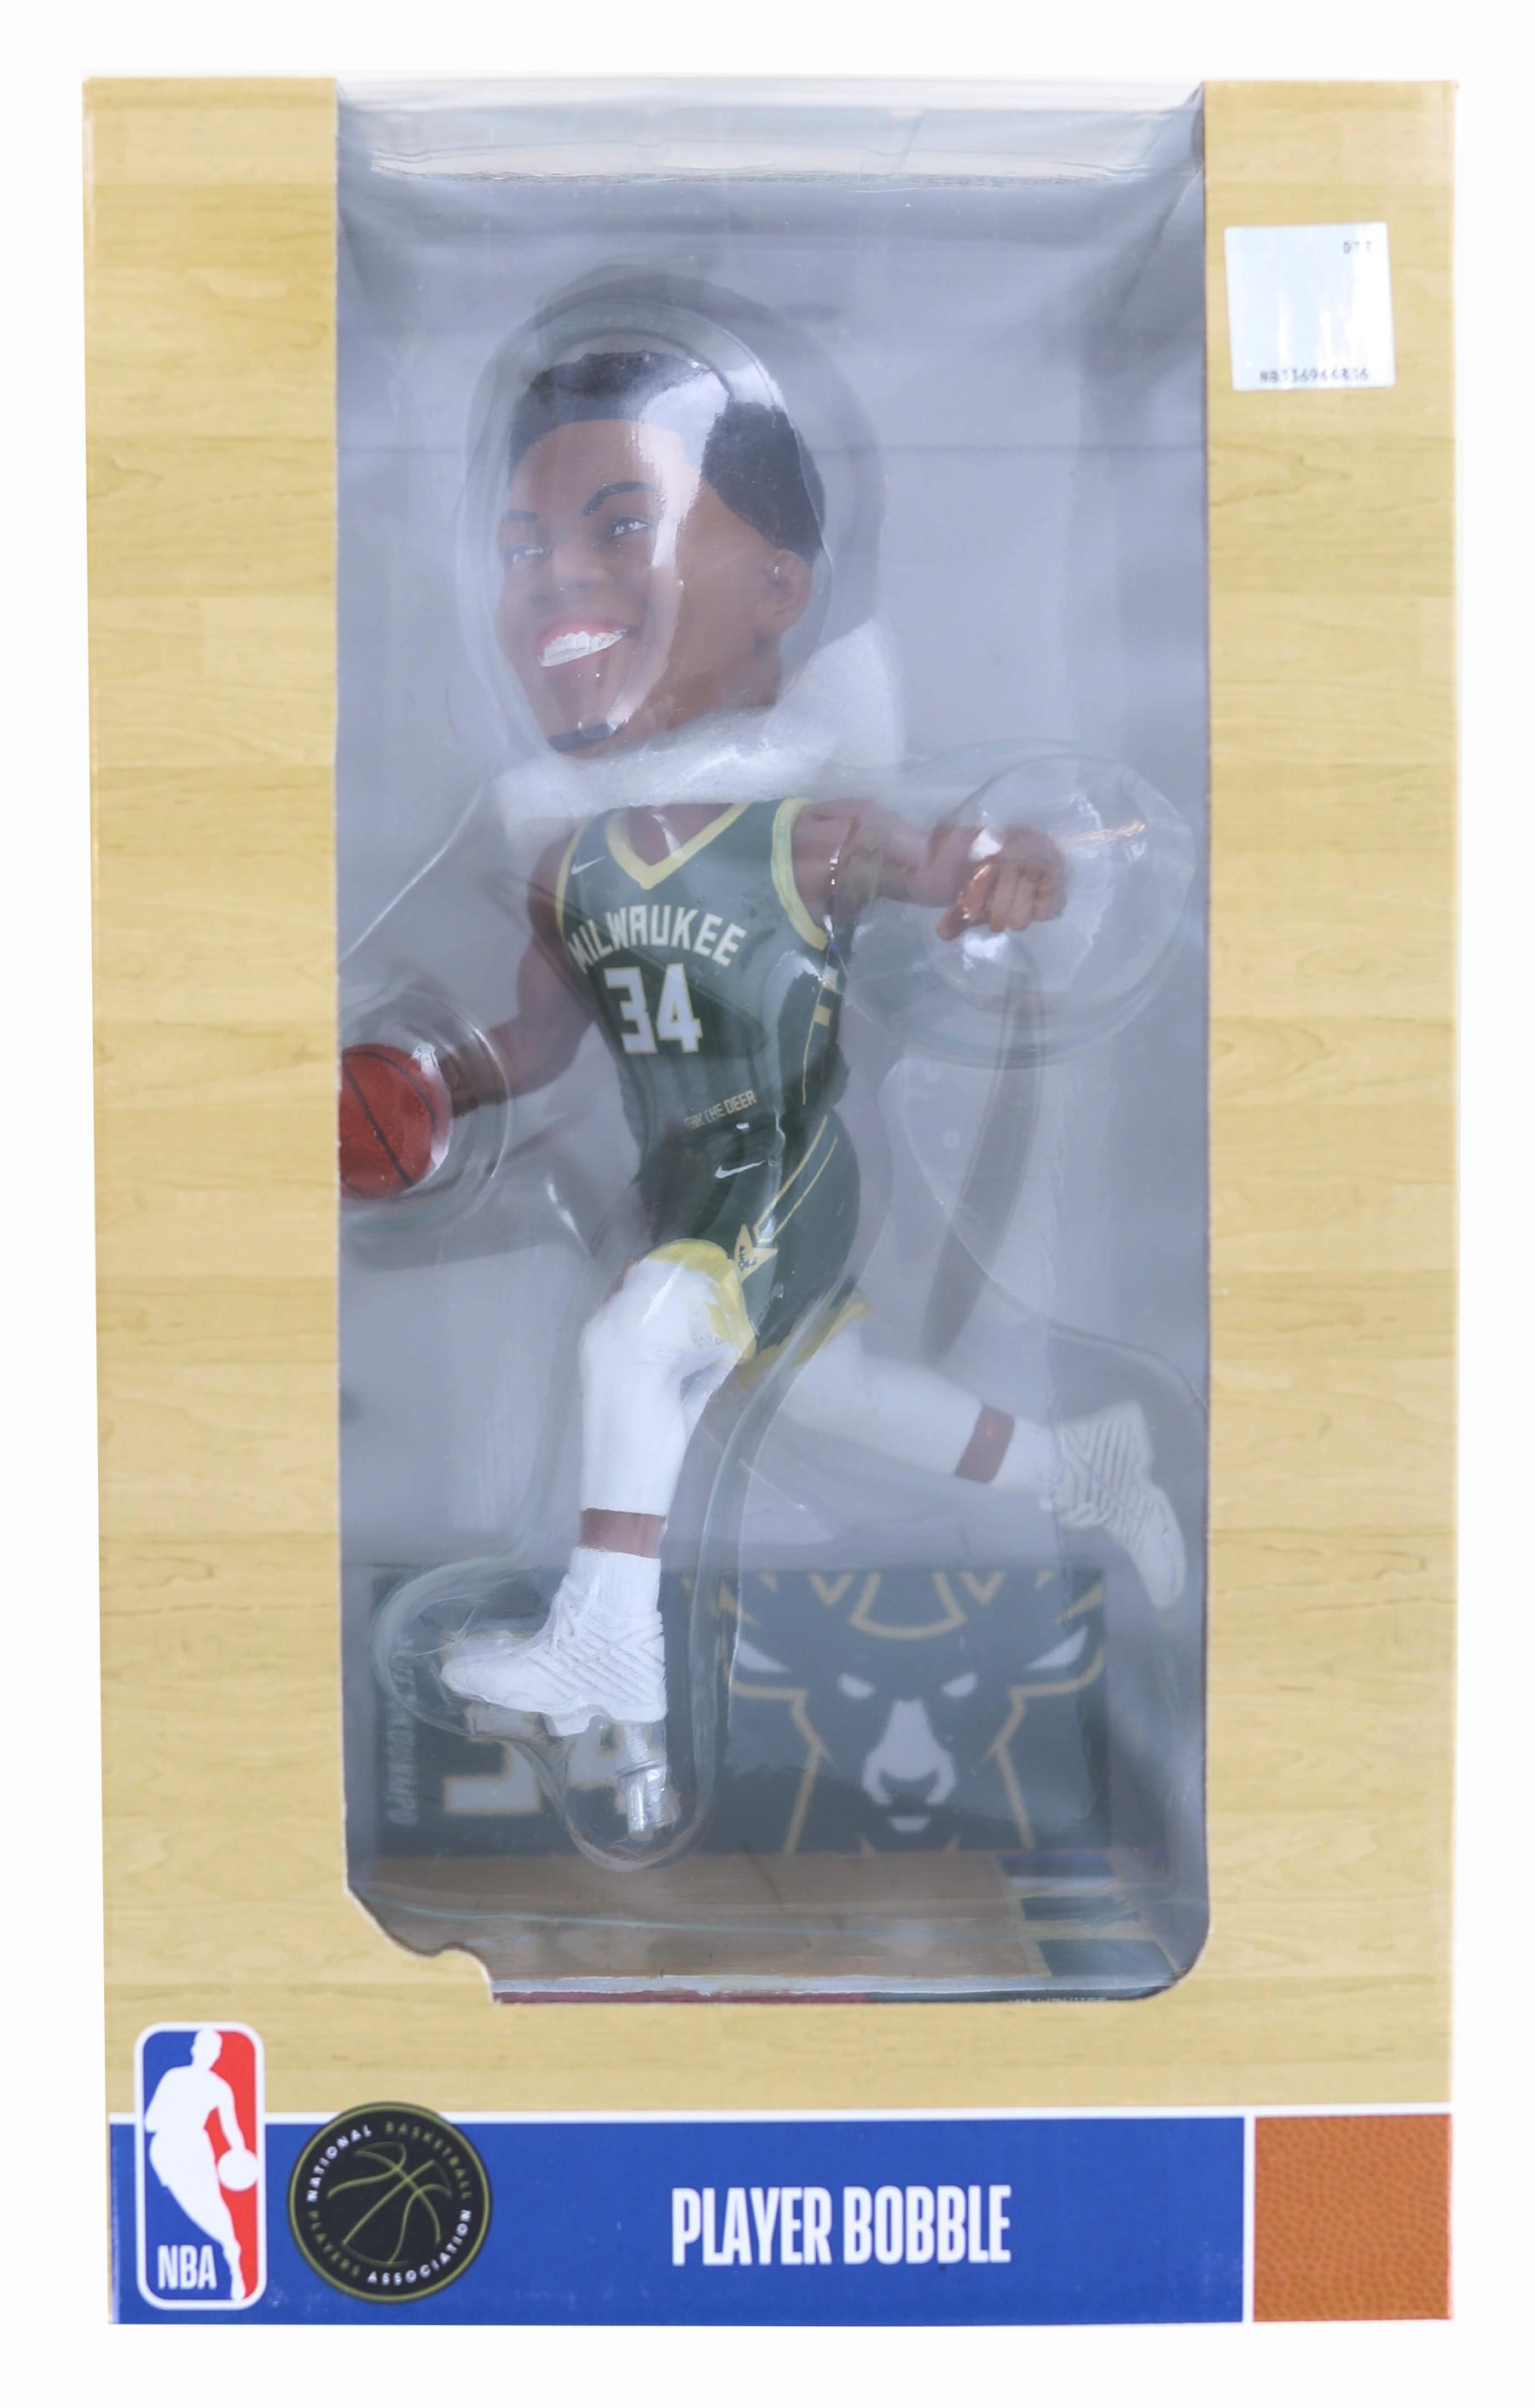 Bucks bobbleheads are up for grabs around the country